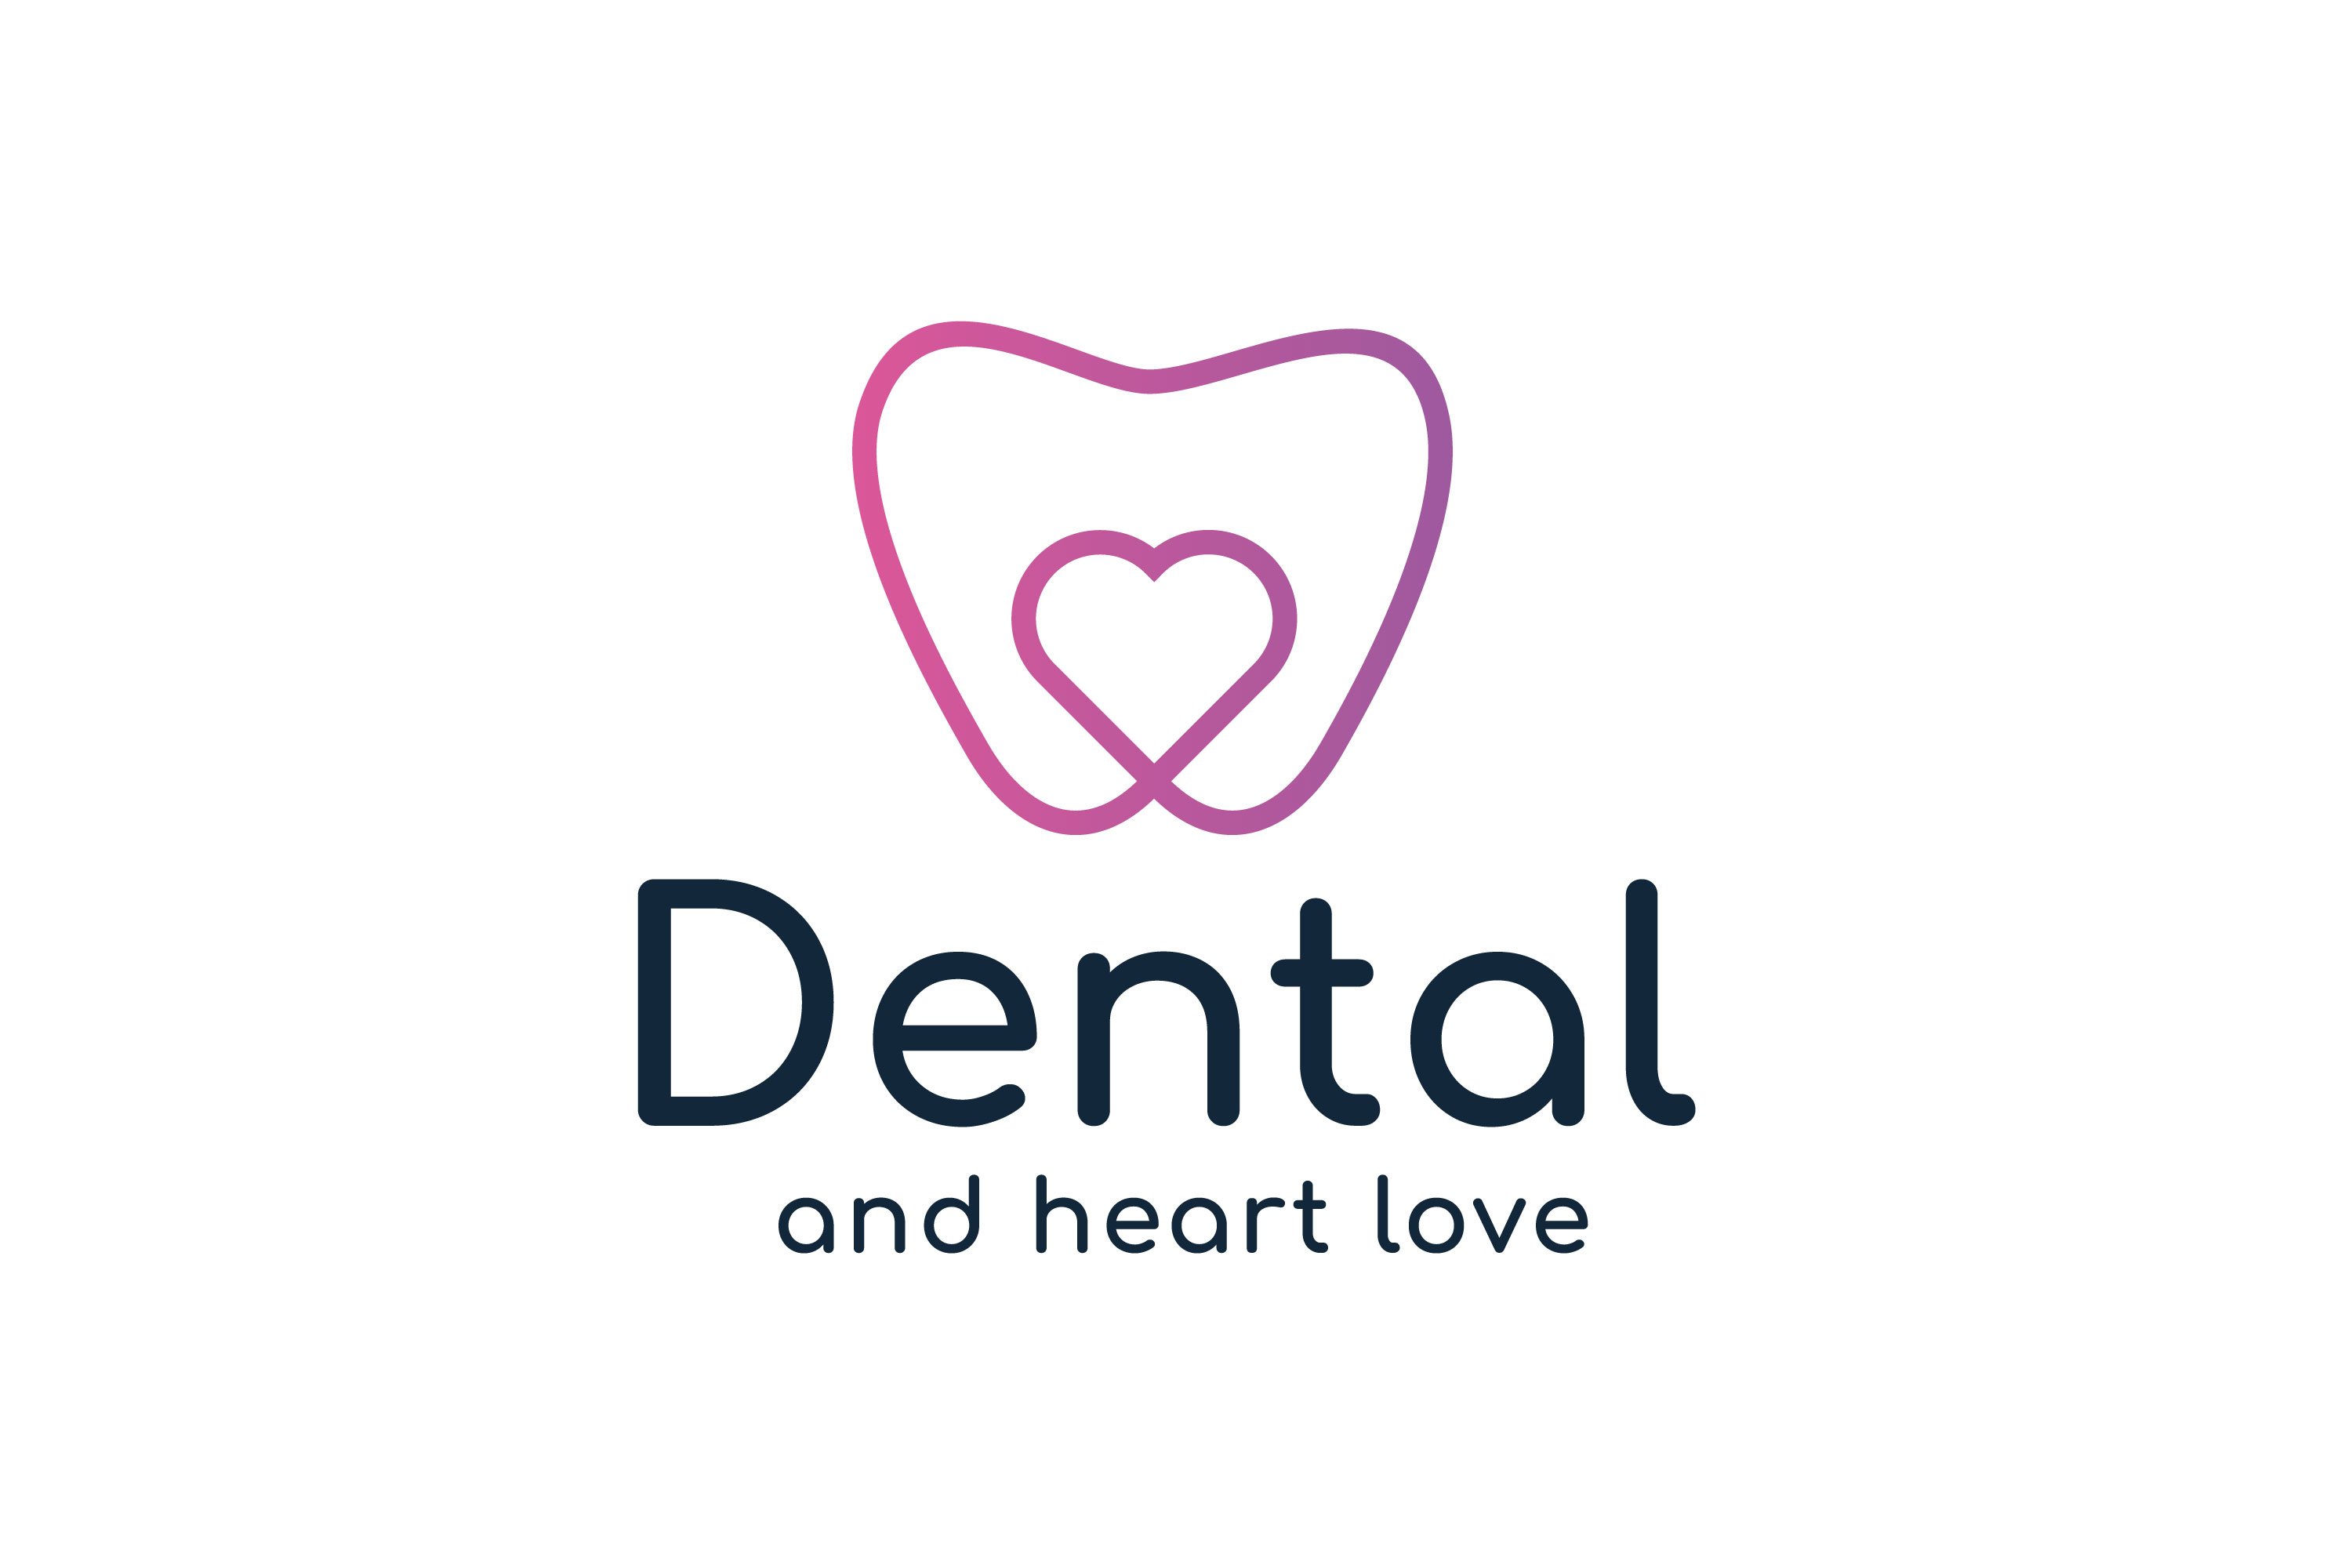 Tooth and heart, dental logo design cover image.